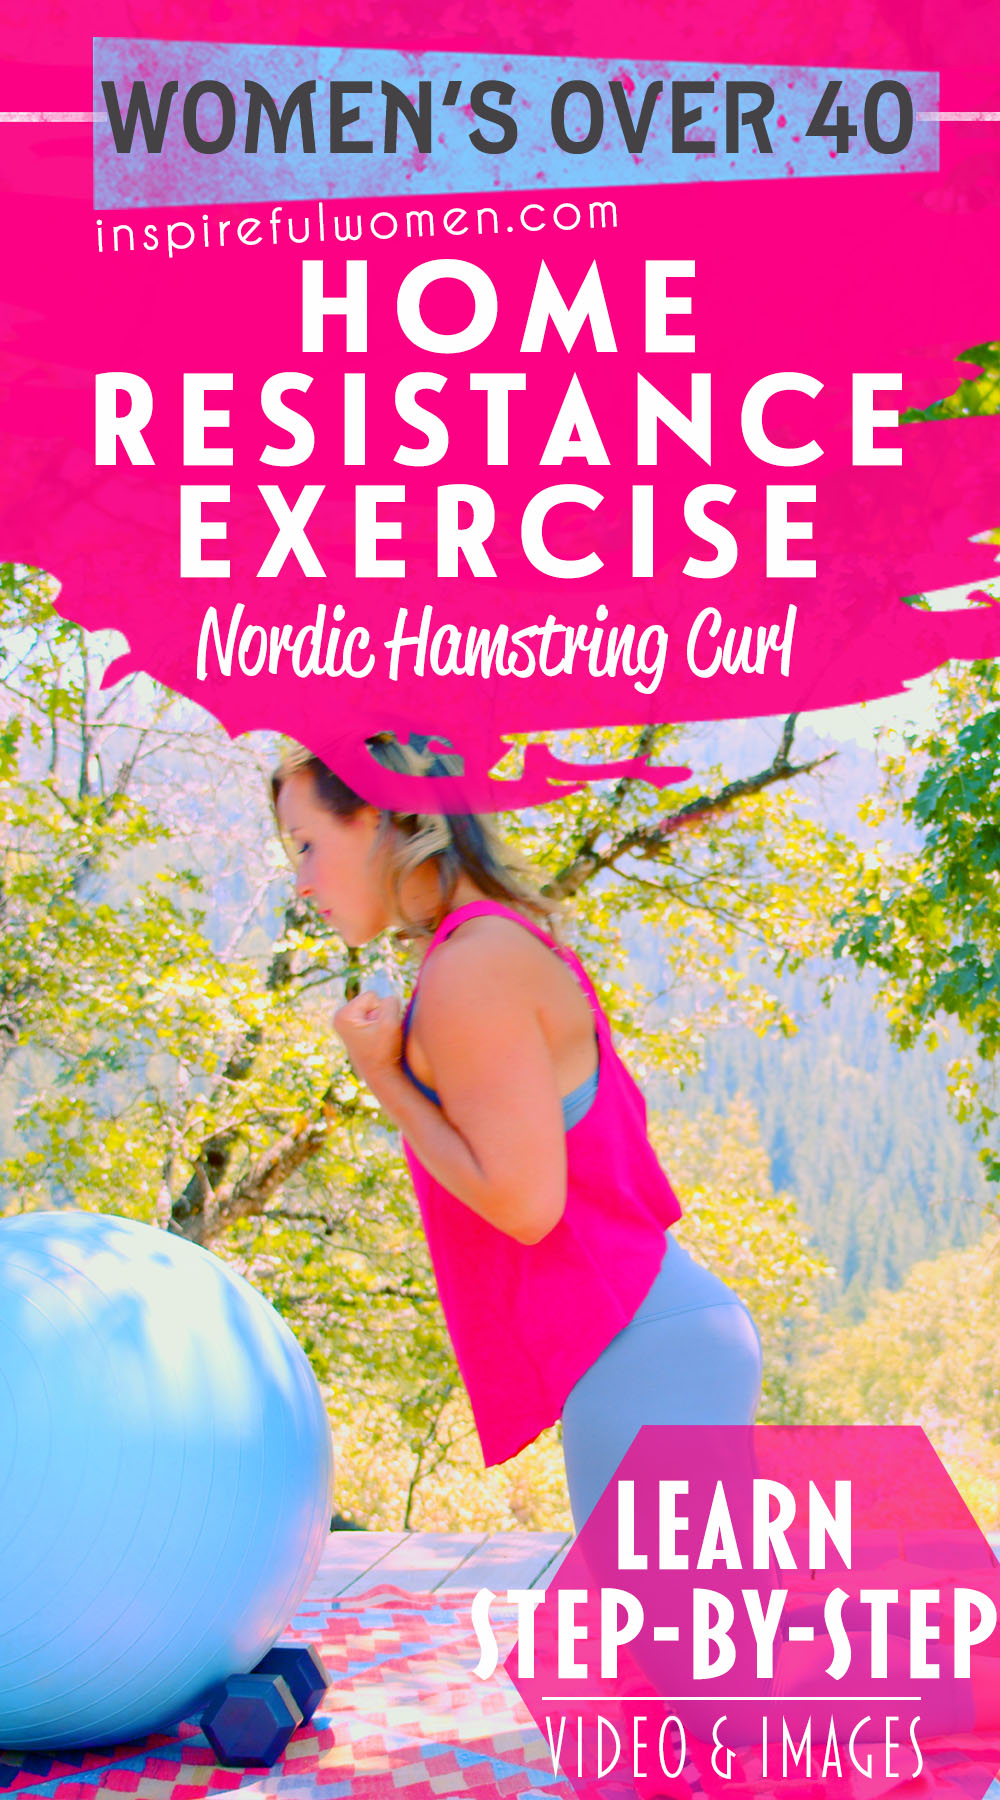 nordic-hamstring-curl-at-home-fall-on-ball-resistance-exercise-women-over-40